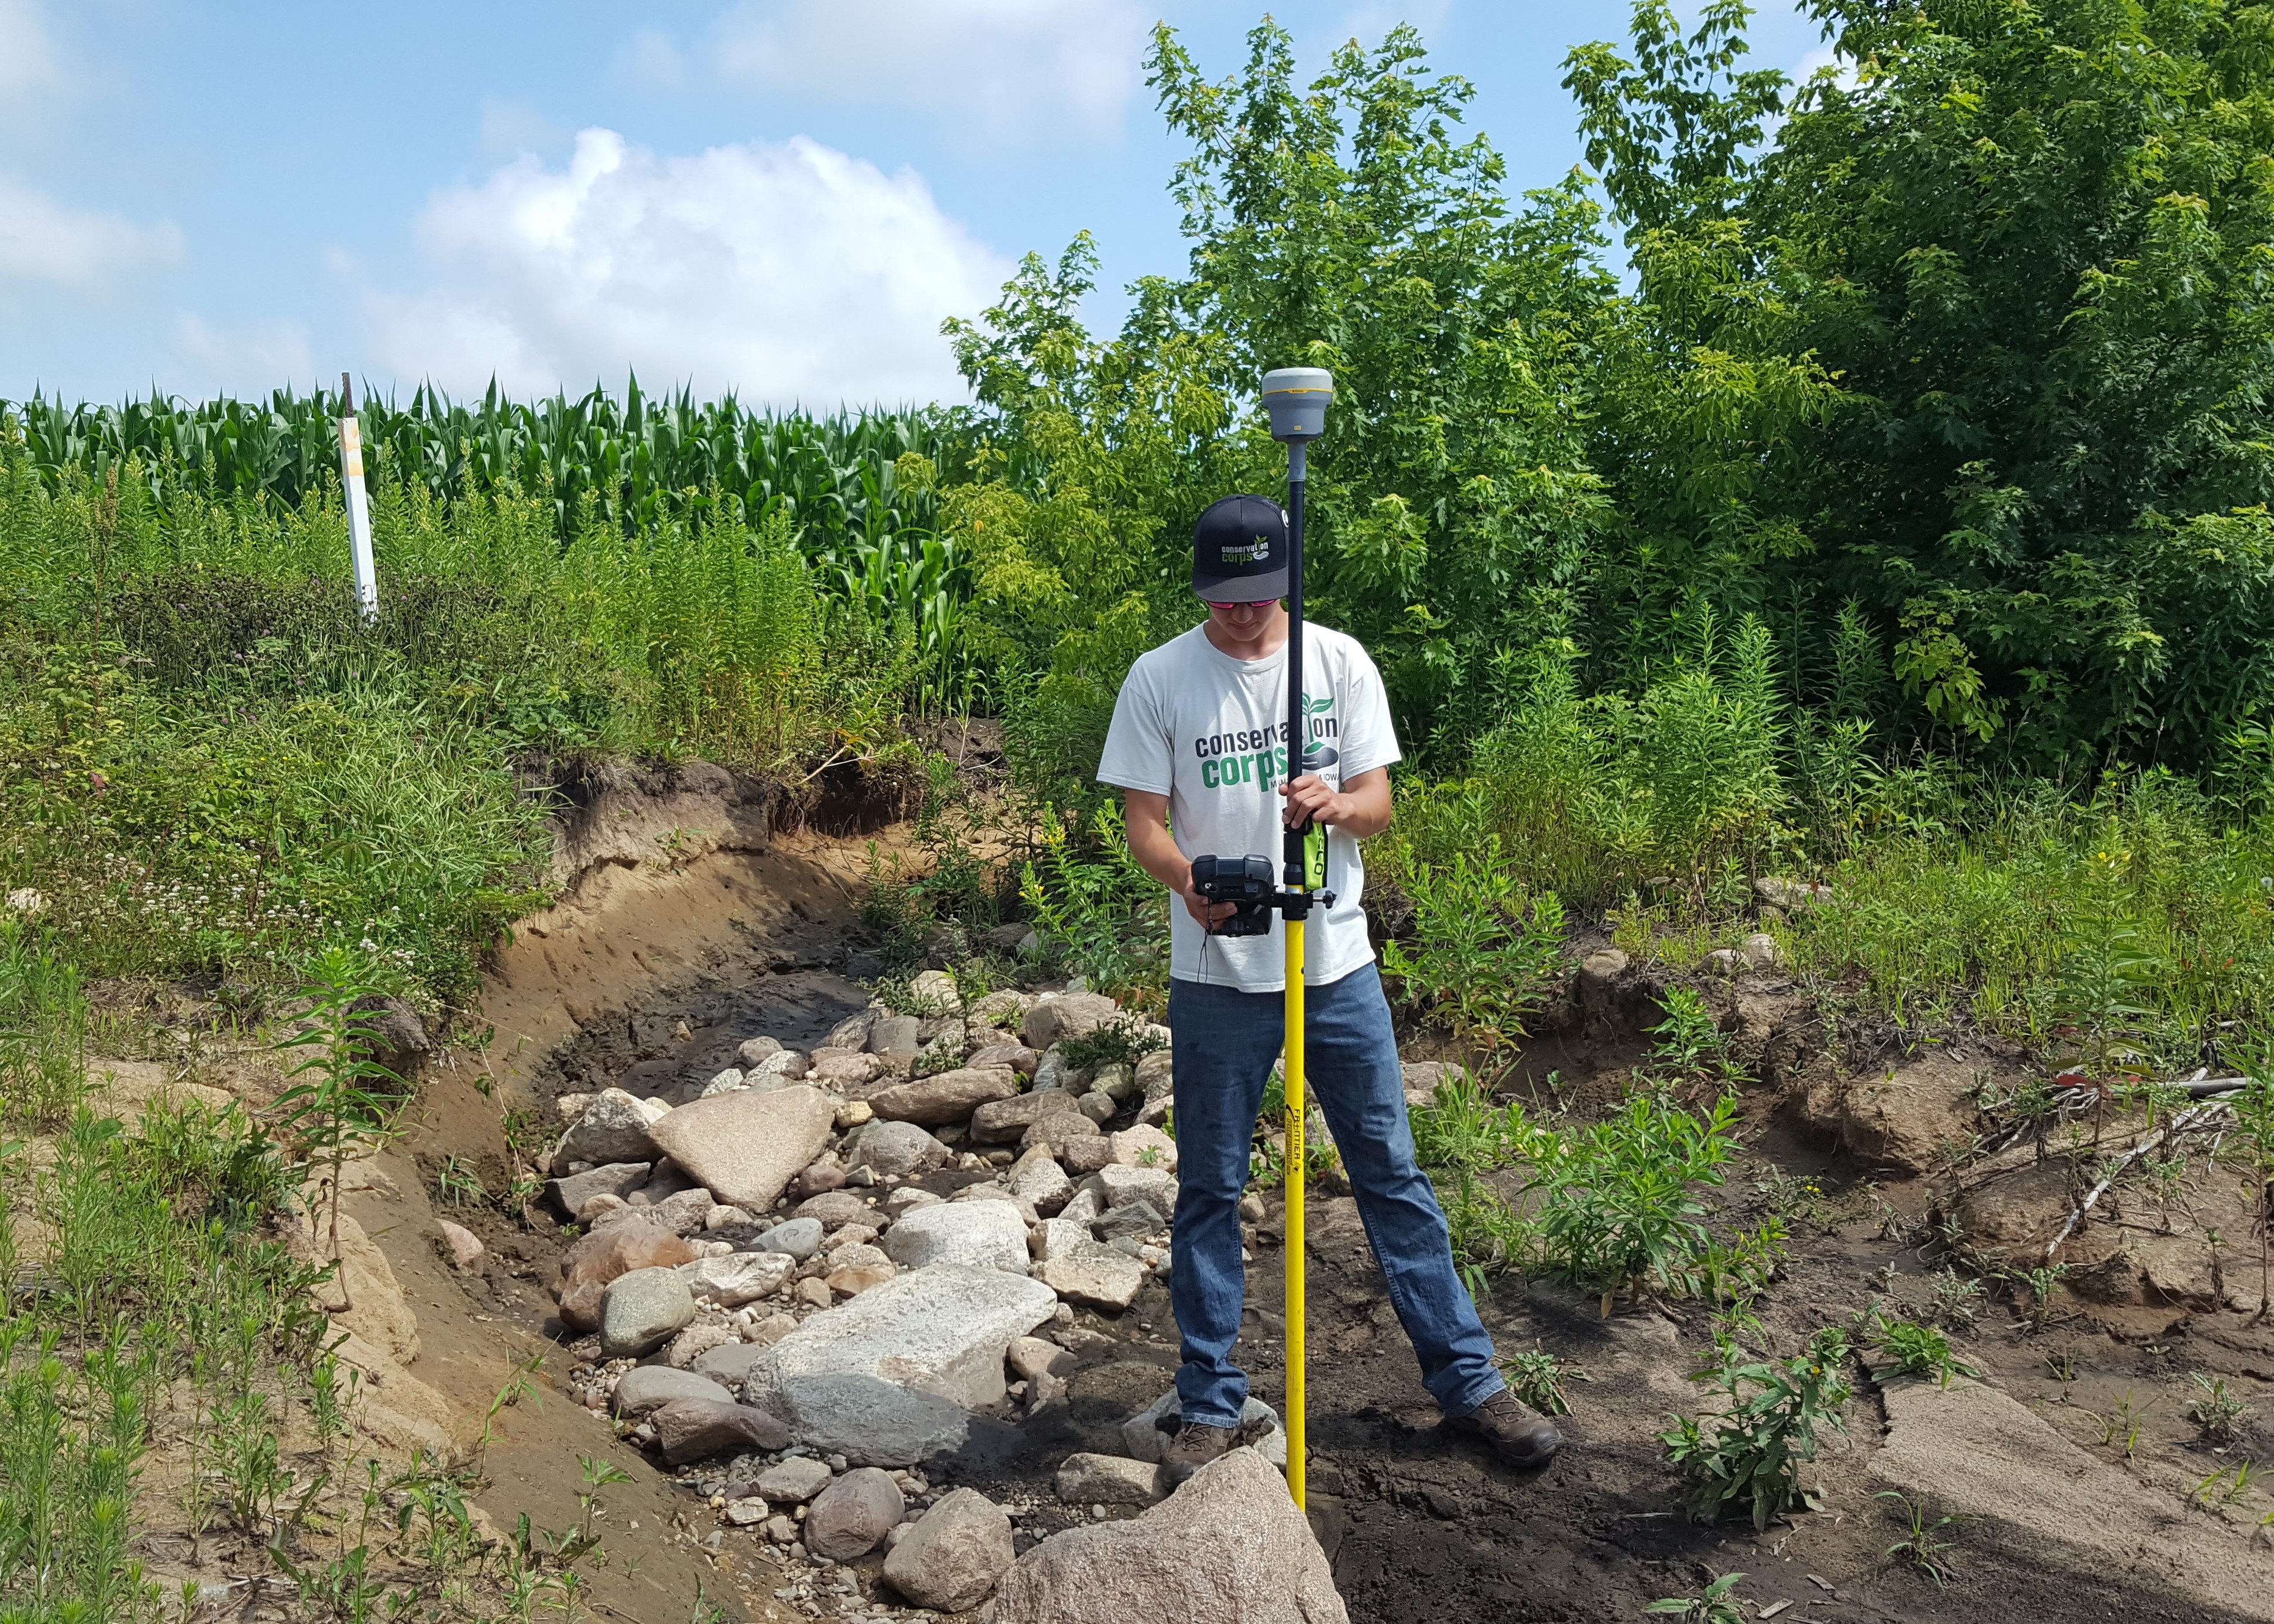 A Conservation Corps apprentice surveys a highly erosive area in 2017 in Mower County. This issue was later addressed through the EQIP program.